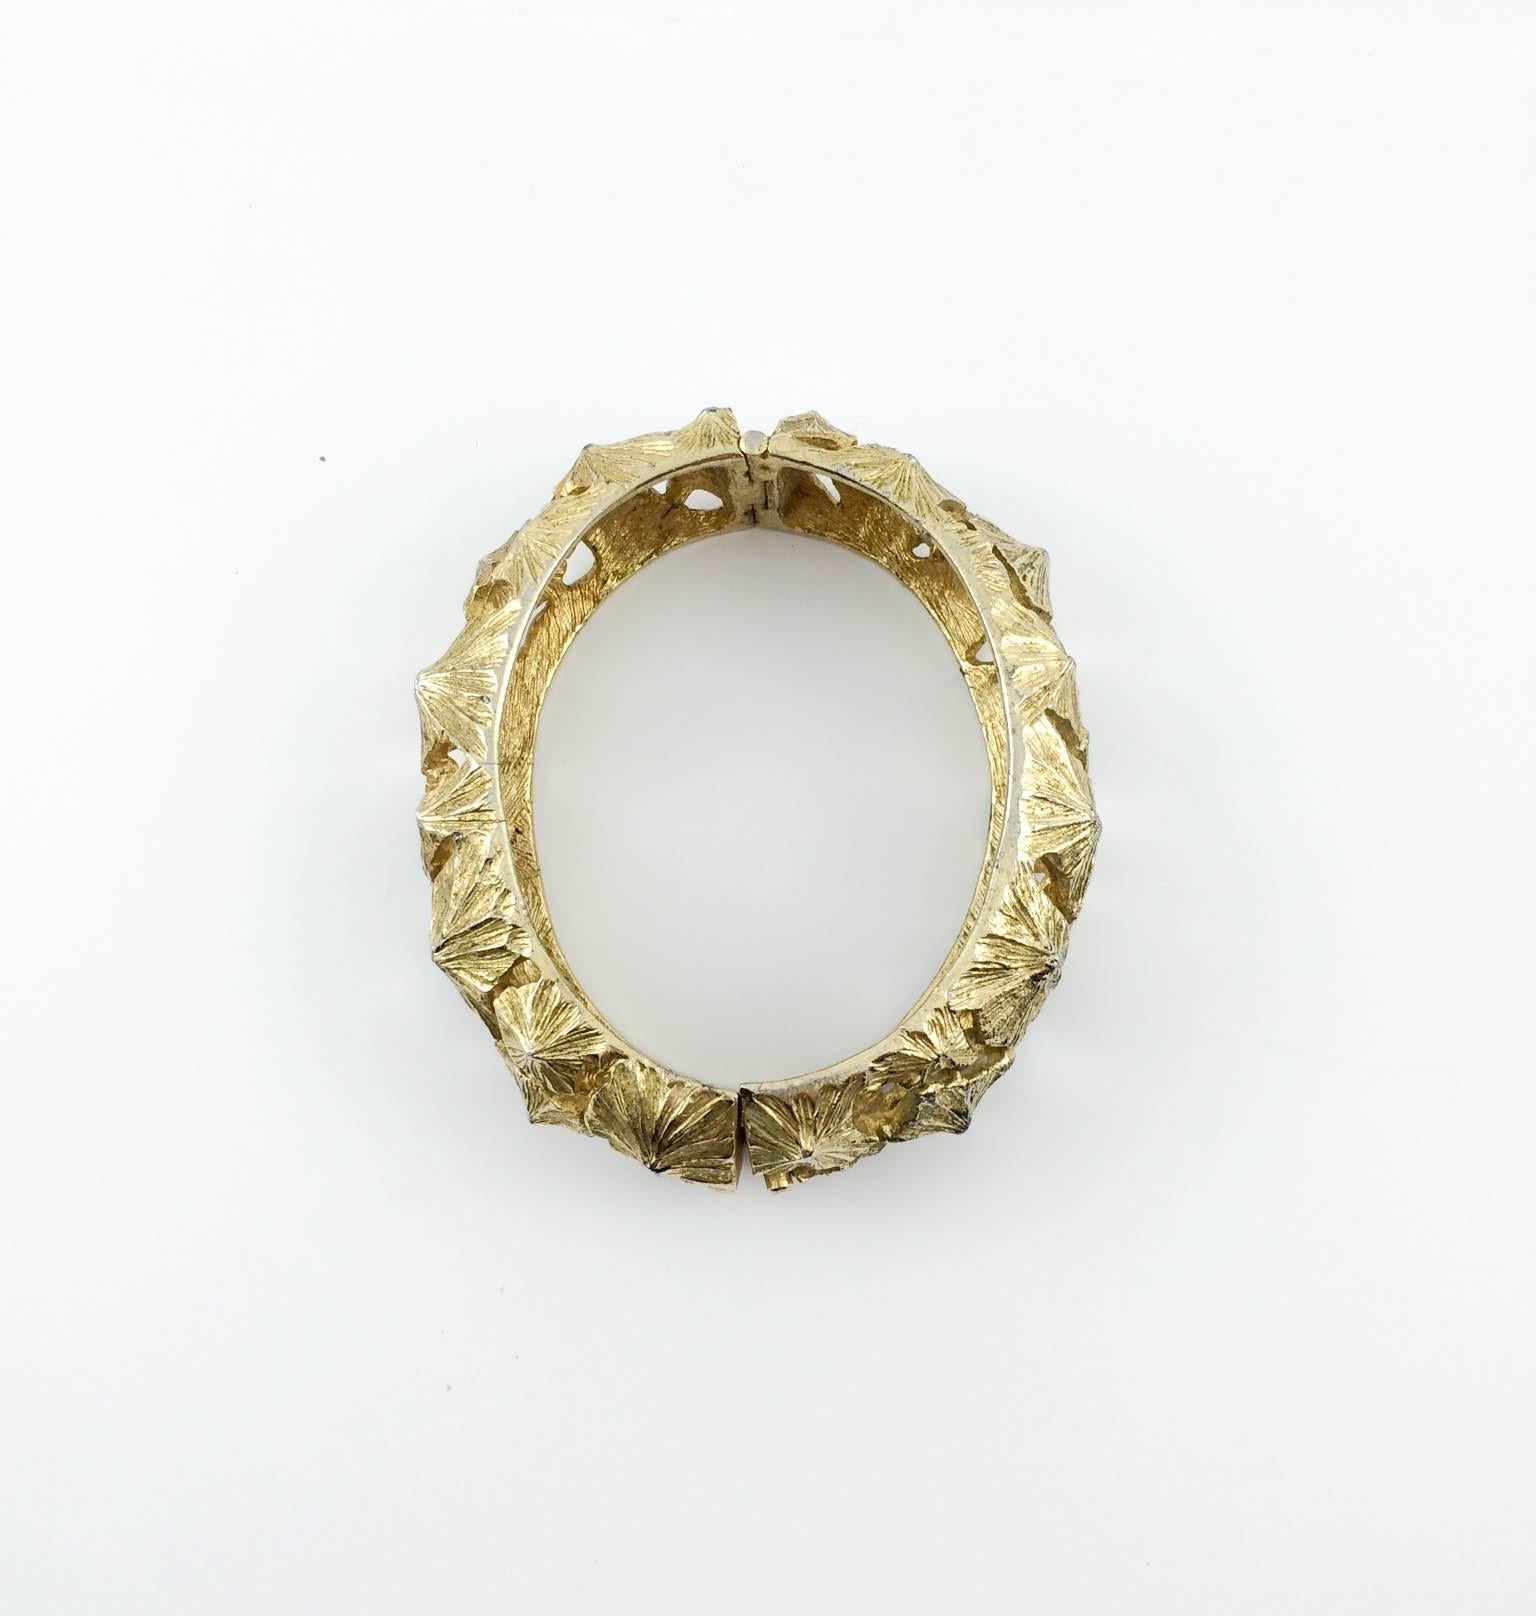 Lanvin Gold-Tone Bracelet - 1970s In Good Condition For Sale In London, Chelsea